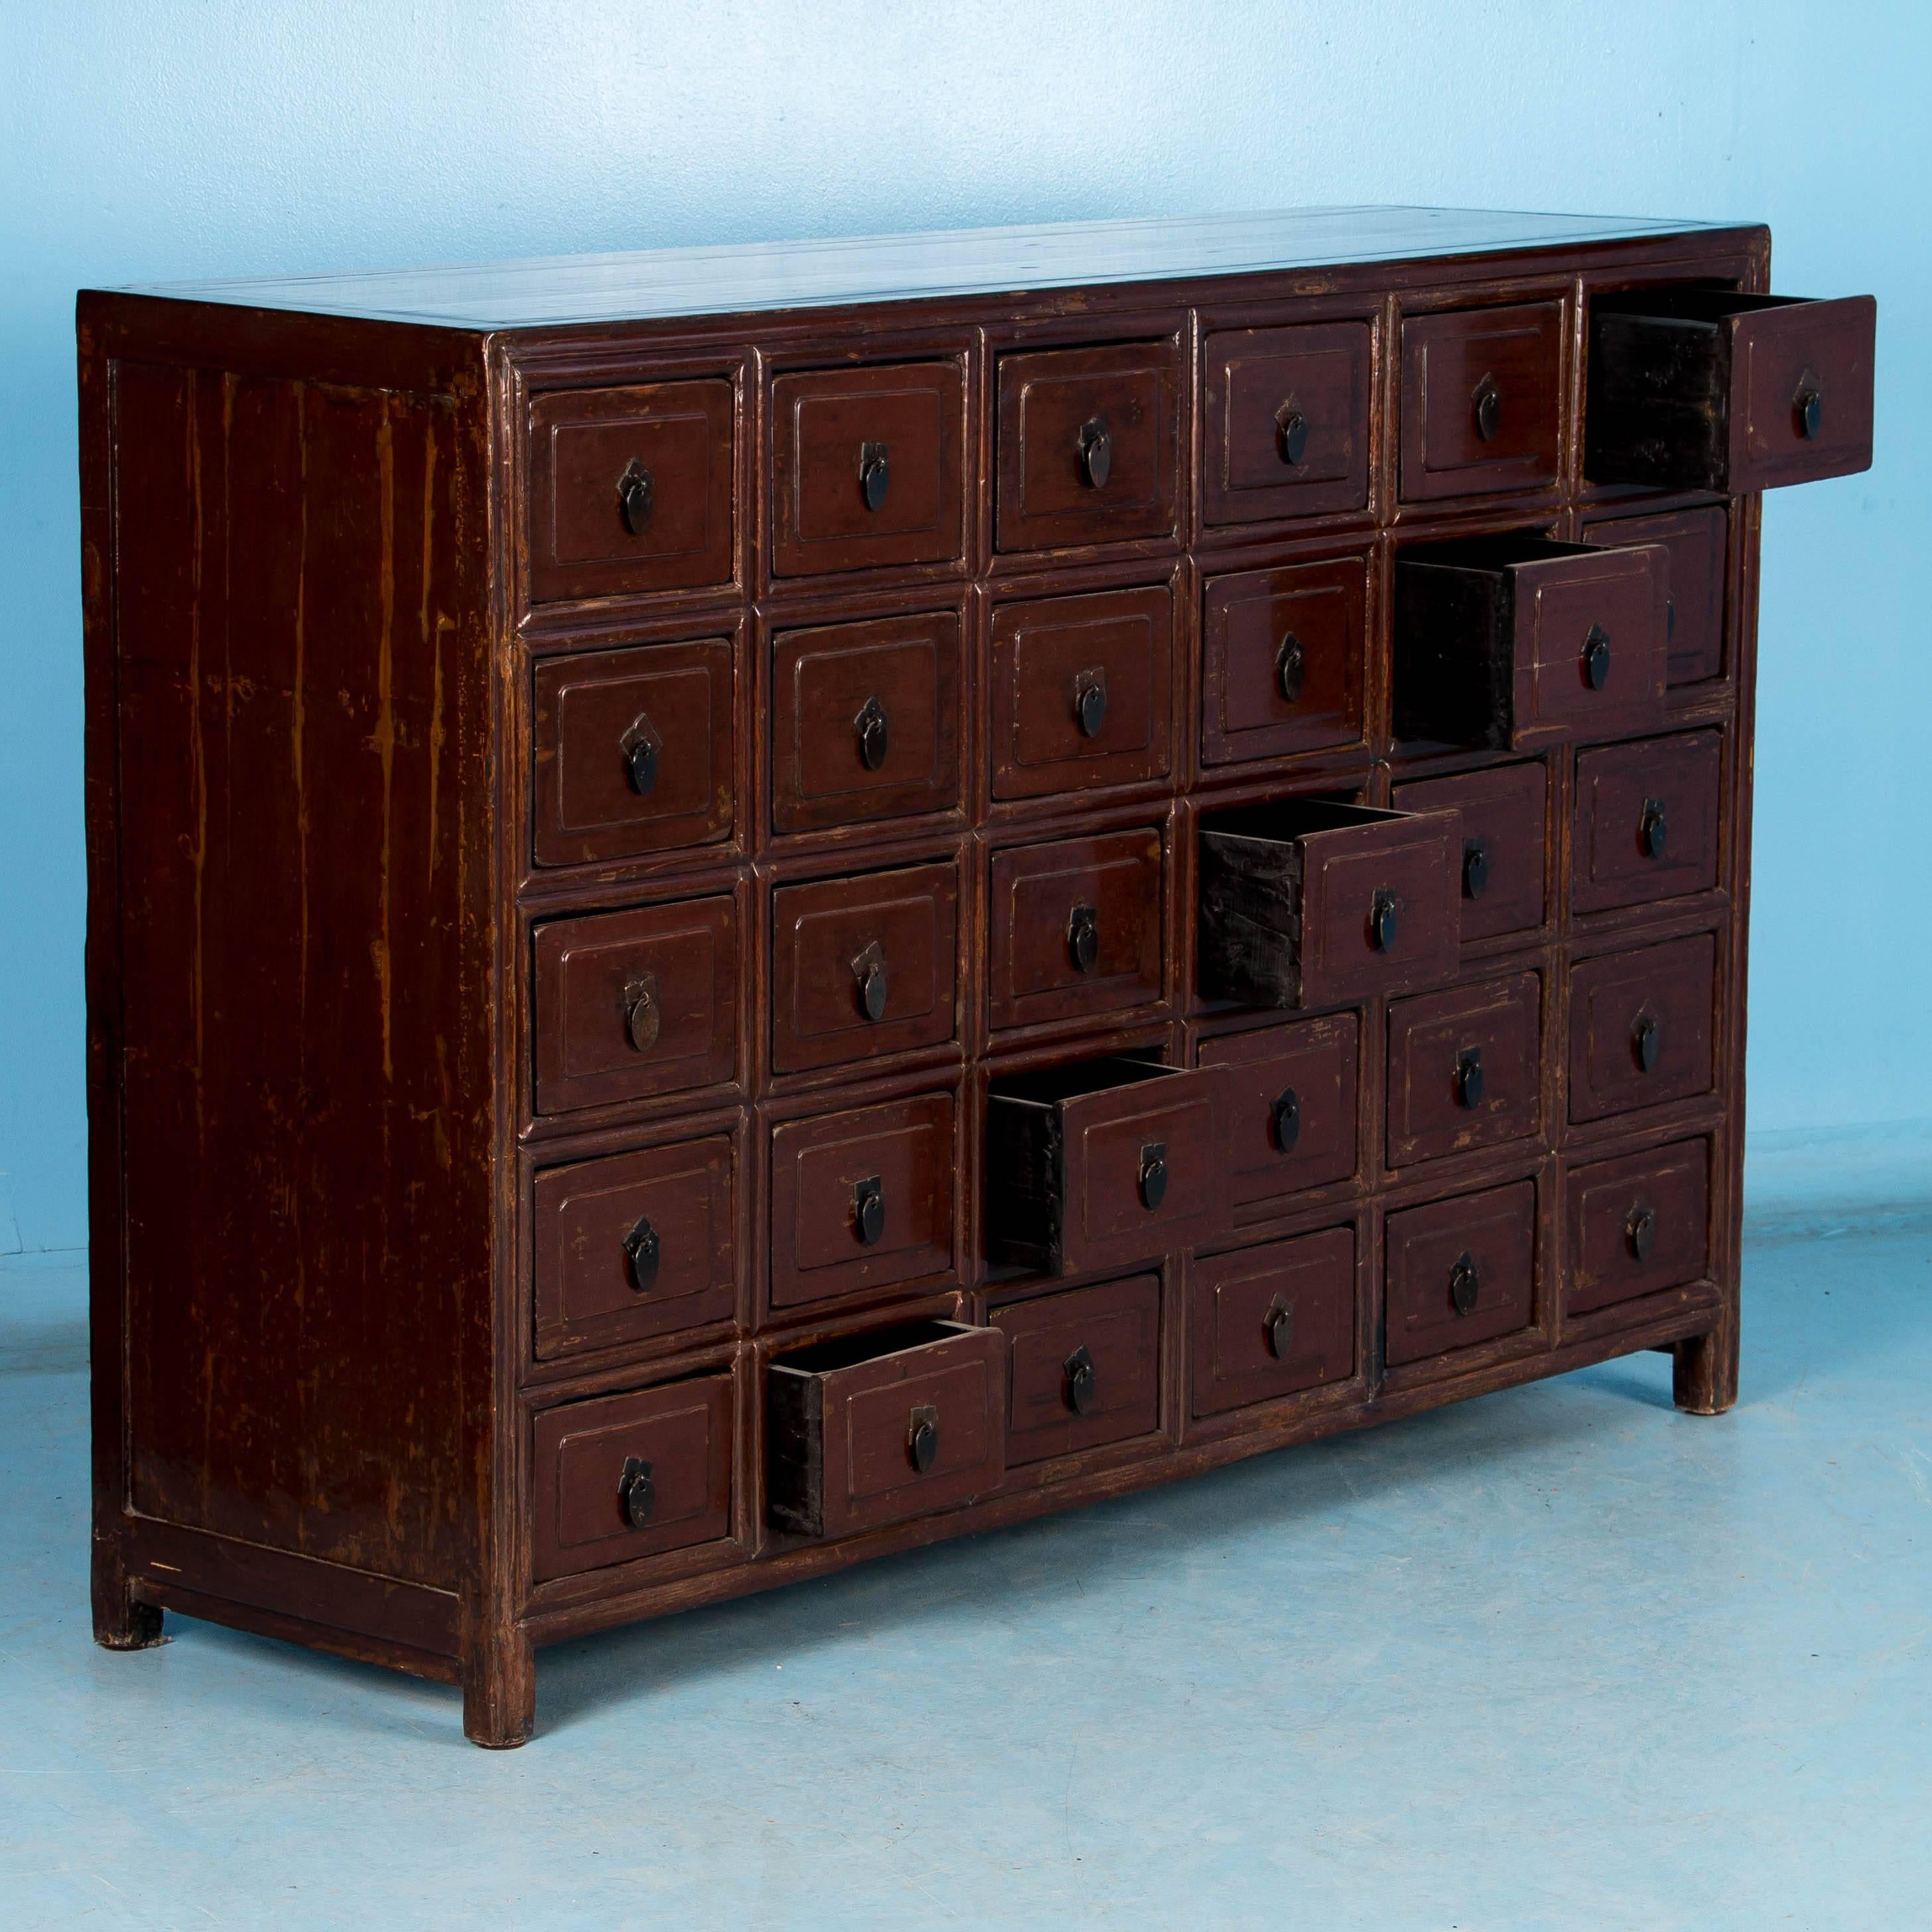 There is something visually mezmerizing about an old apothecary and this unique Chinese cabinet from the late 1800's is no execption. Each of the 30 drawers is paneled and has a functioning pull, and the drawers slide smoothly. The rich deep brown